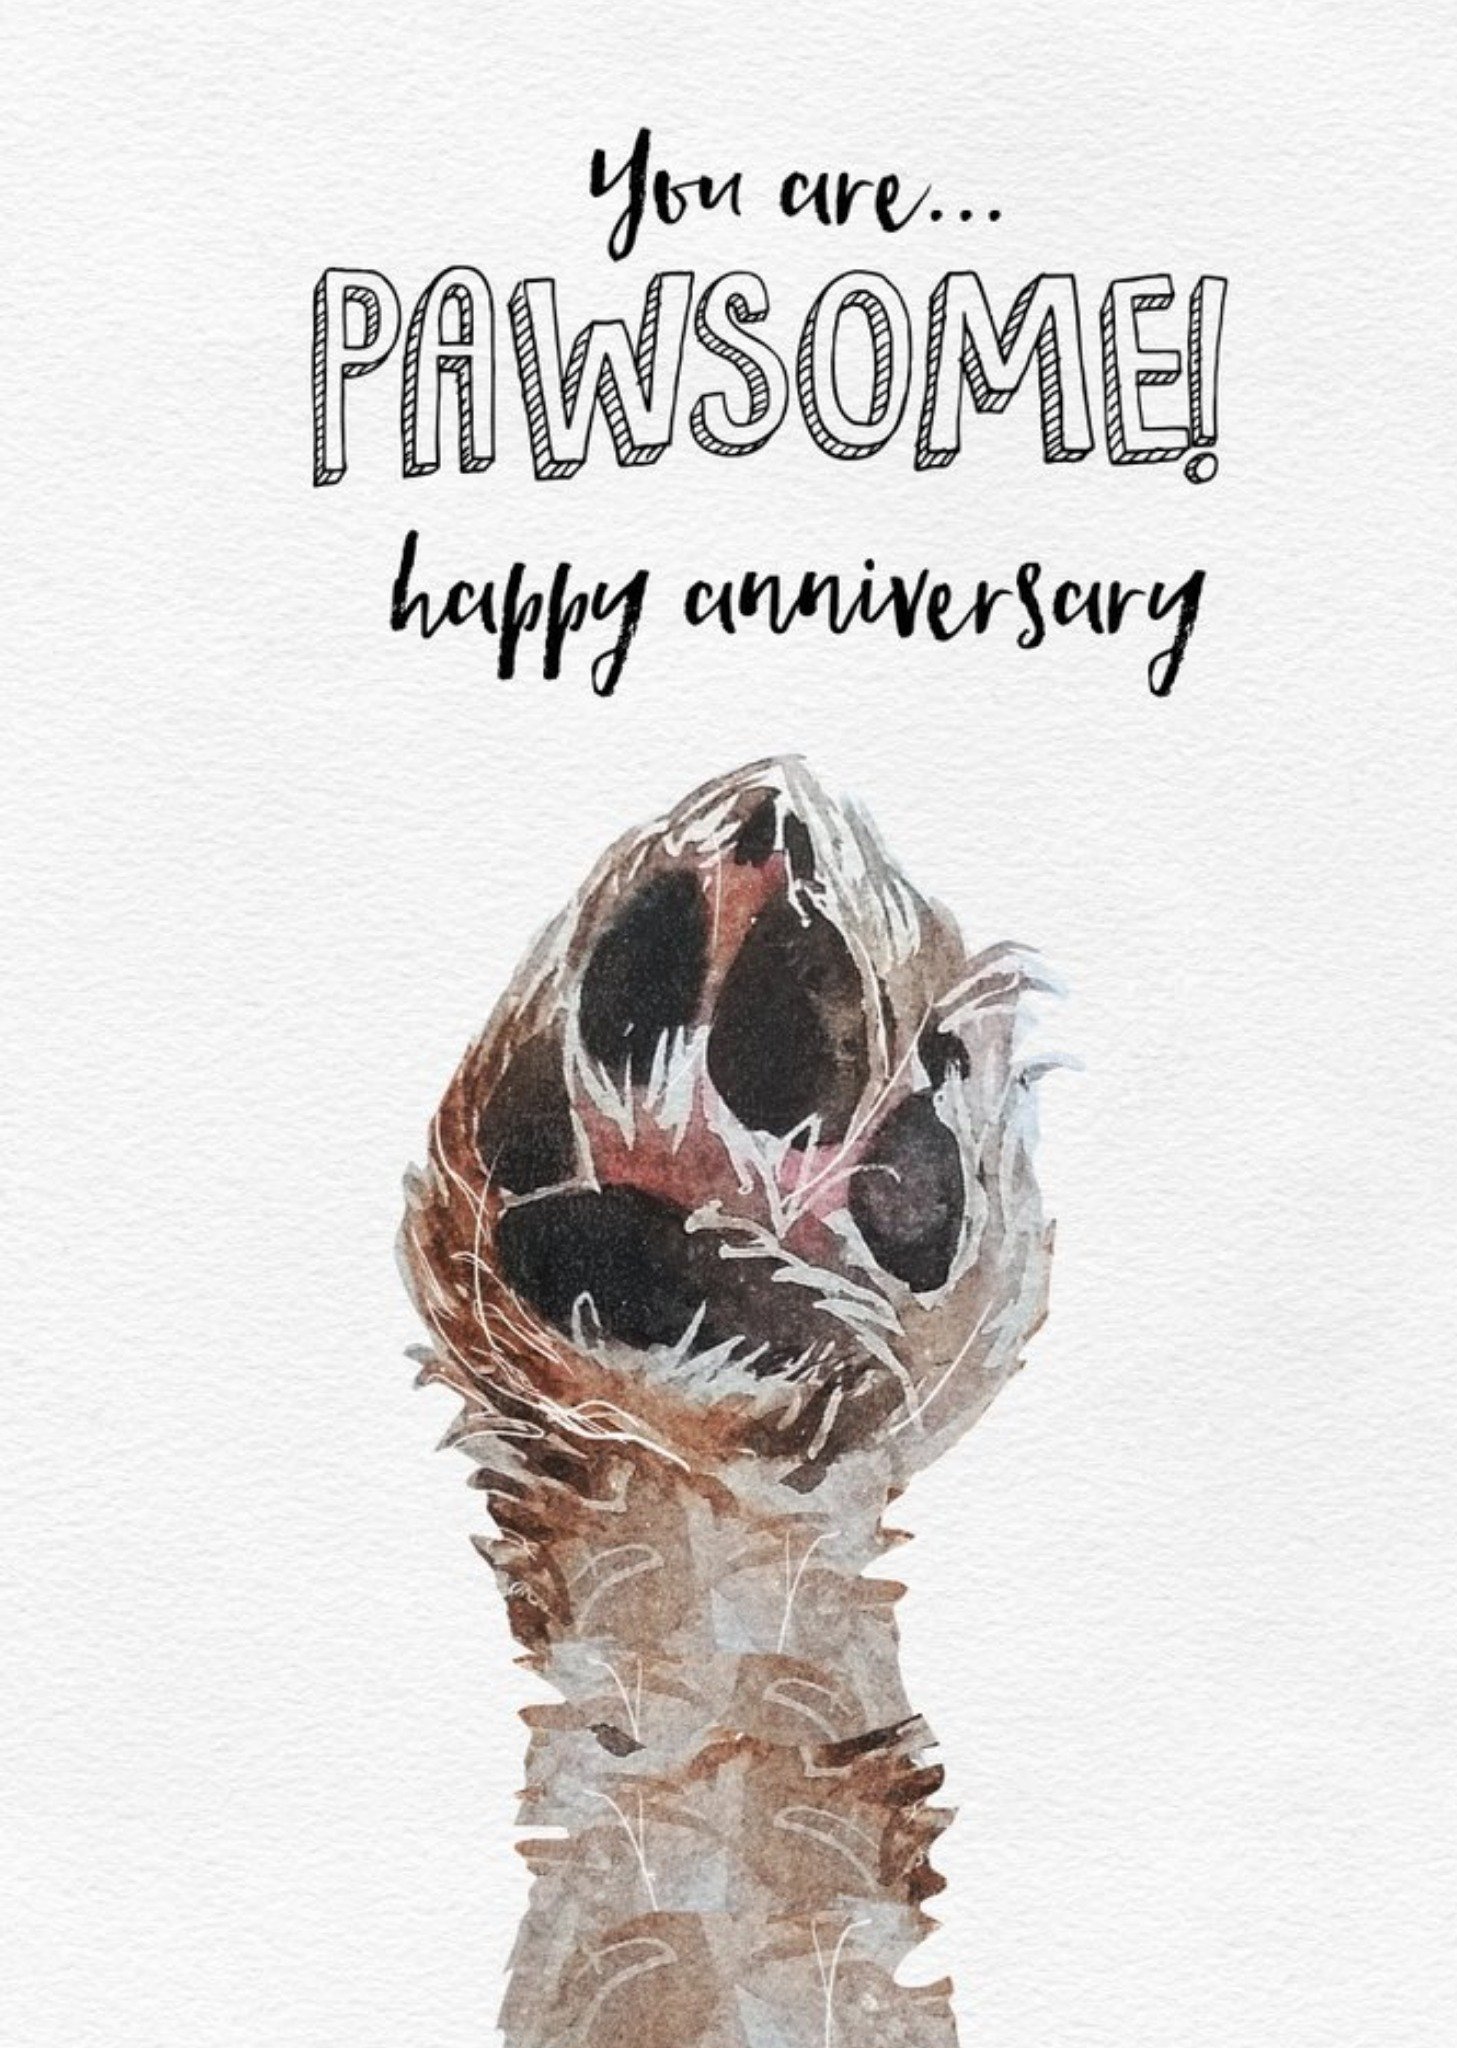 Moonpig Cute Paw Watercolour Illustration You Are Pawsome Anniversary Card Ecard